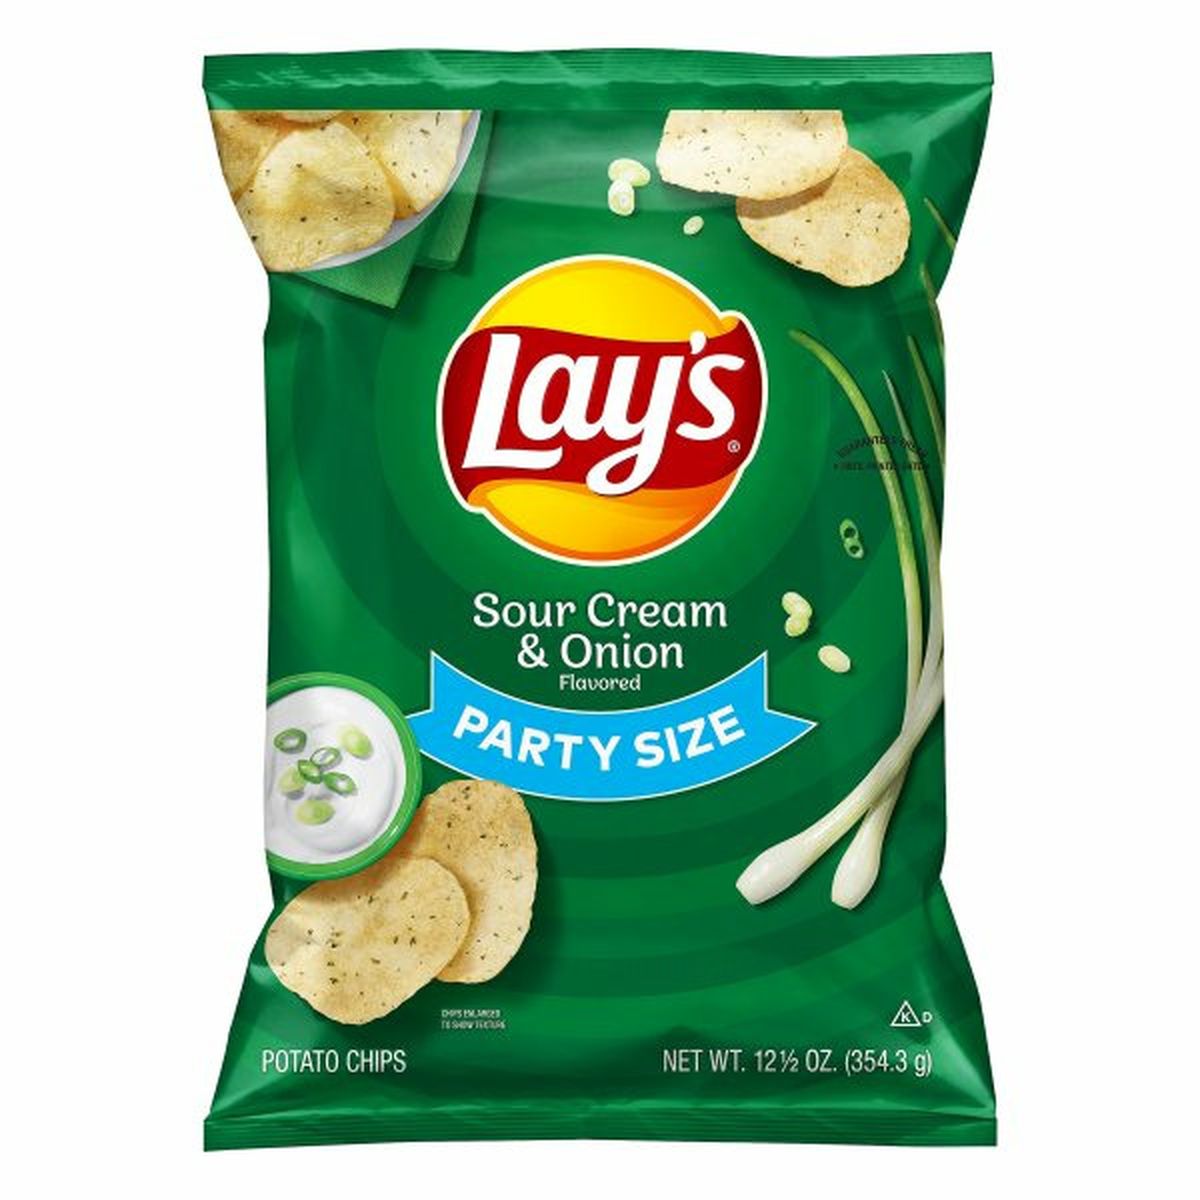 Calories in Lay's Potato Chips, Sour Cream & Onion Flavored, Party Size